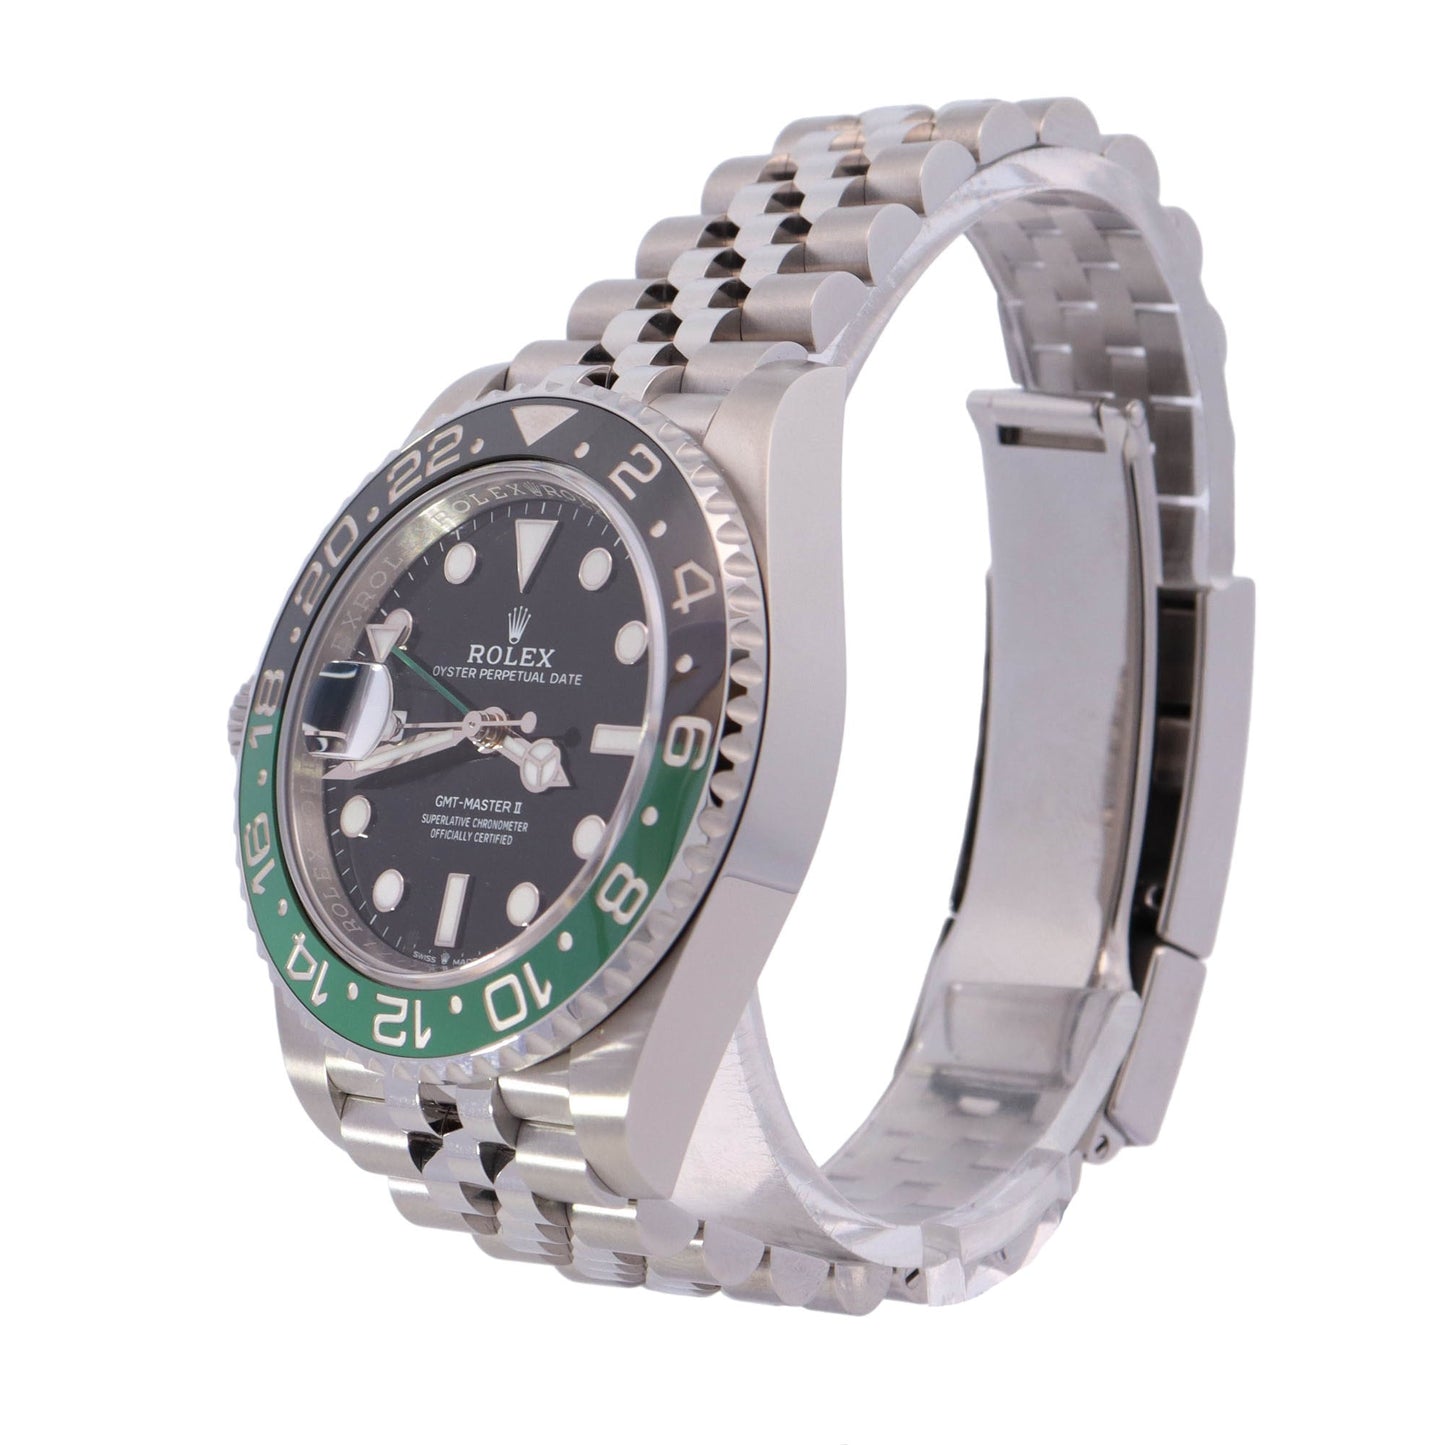 Rolex GMT Master II "Sprite" Stainless Steel Black Dot Dial Watch Reference #: 126720VTNR